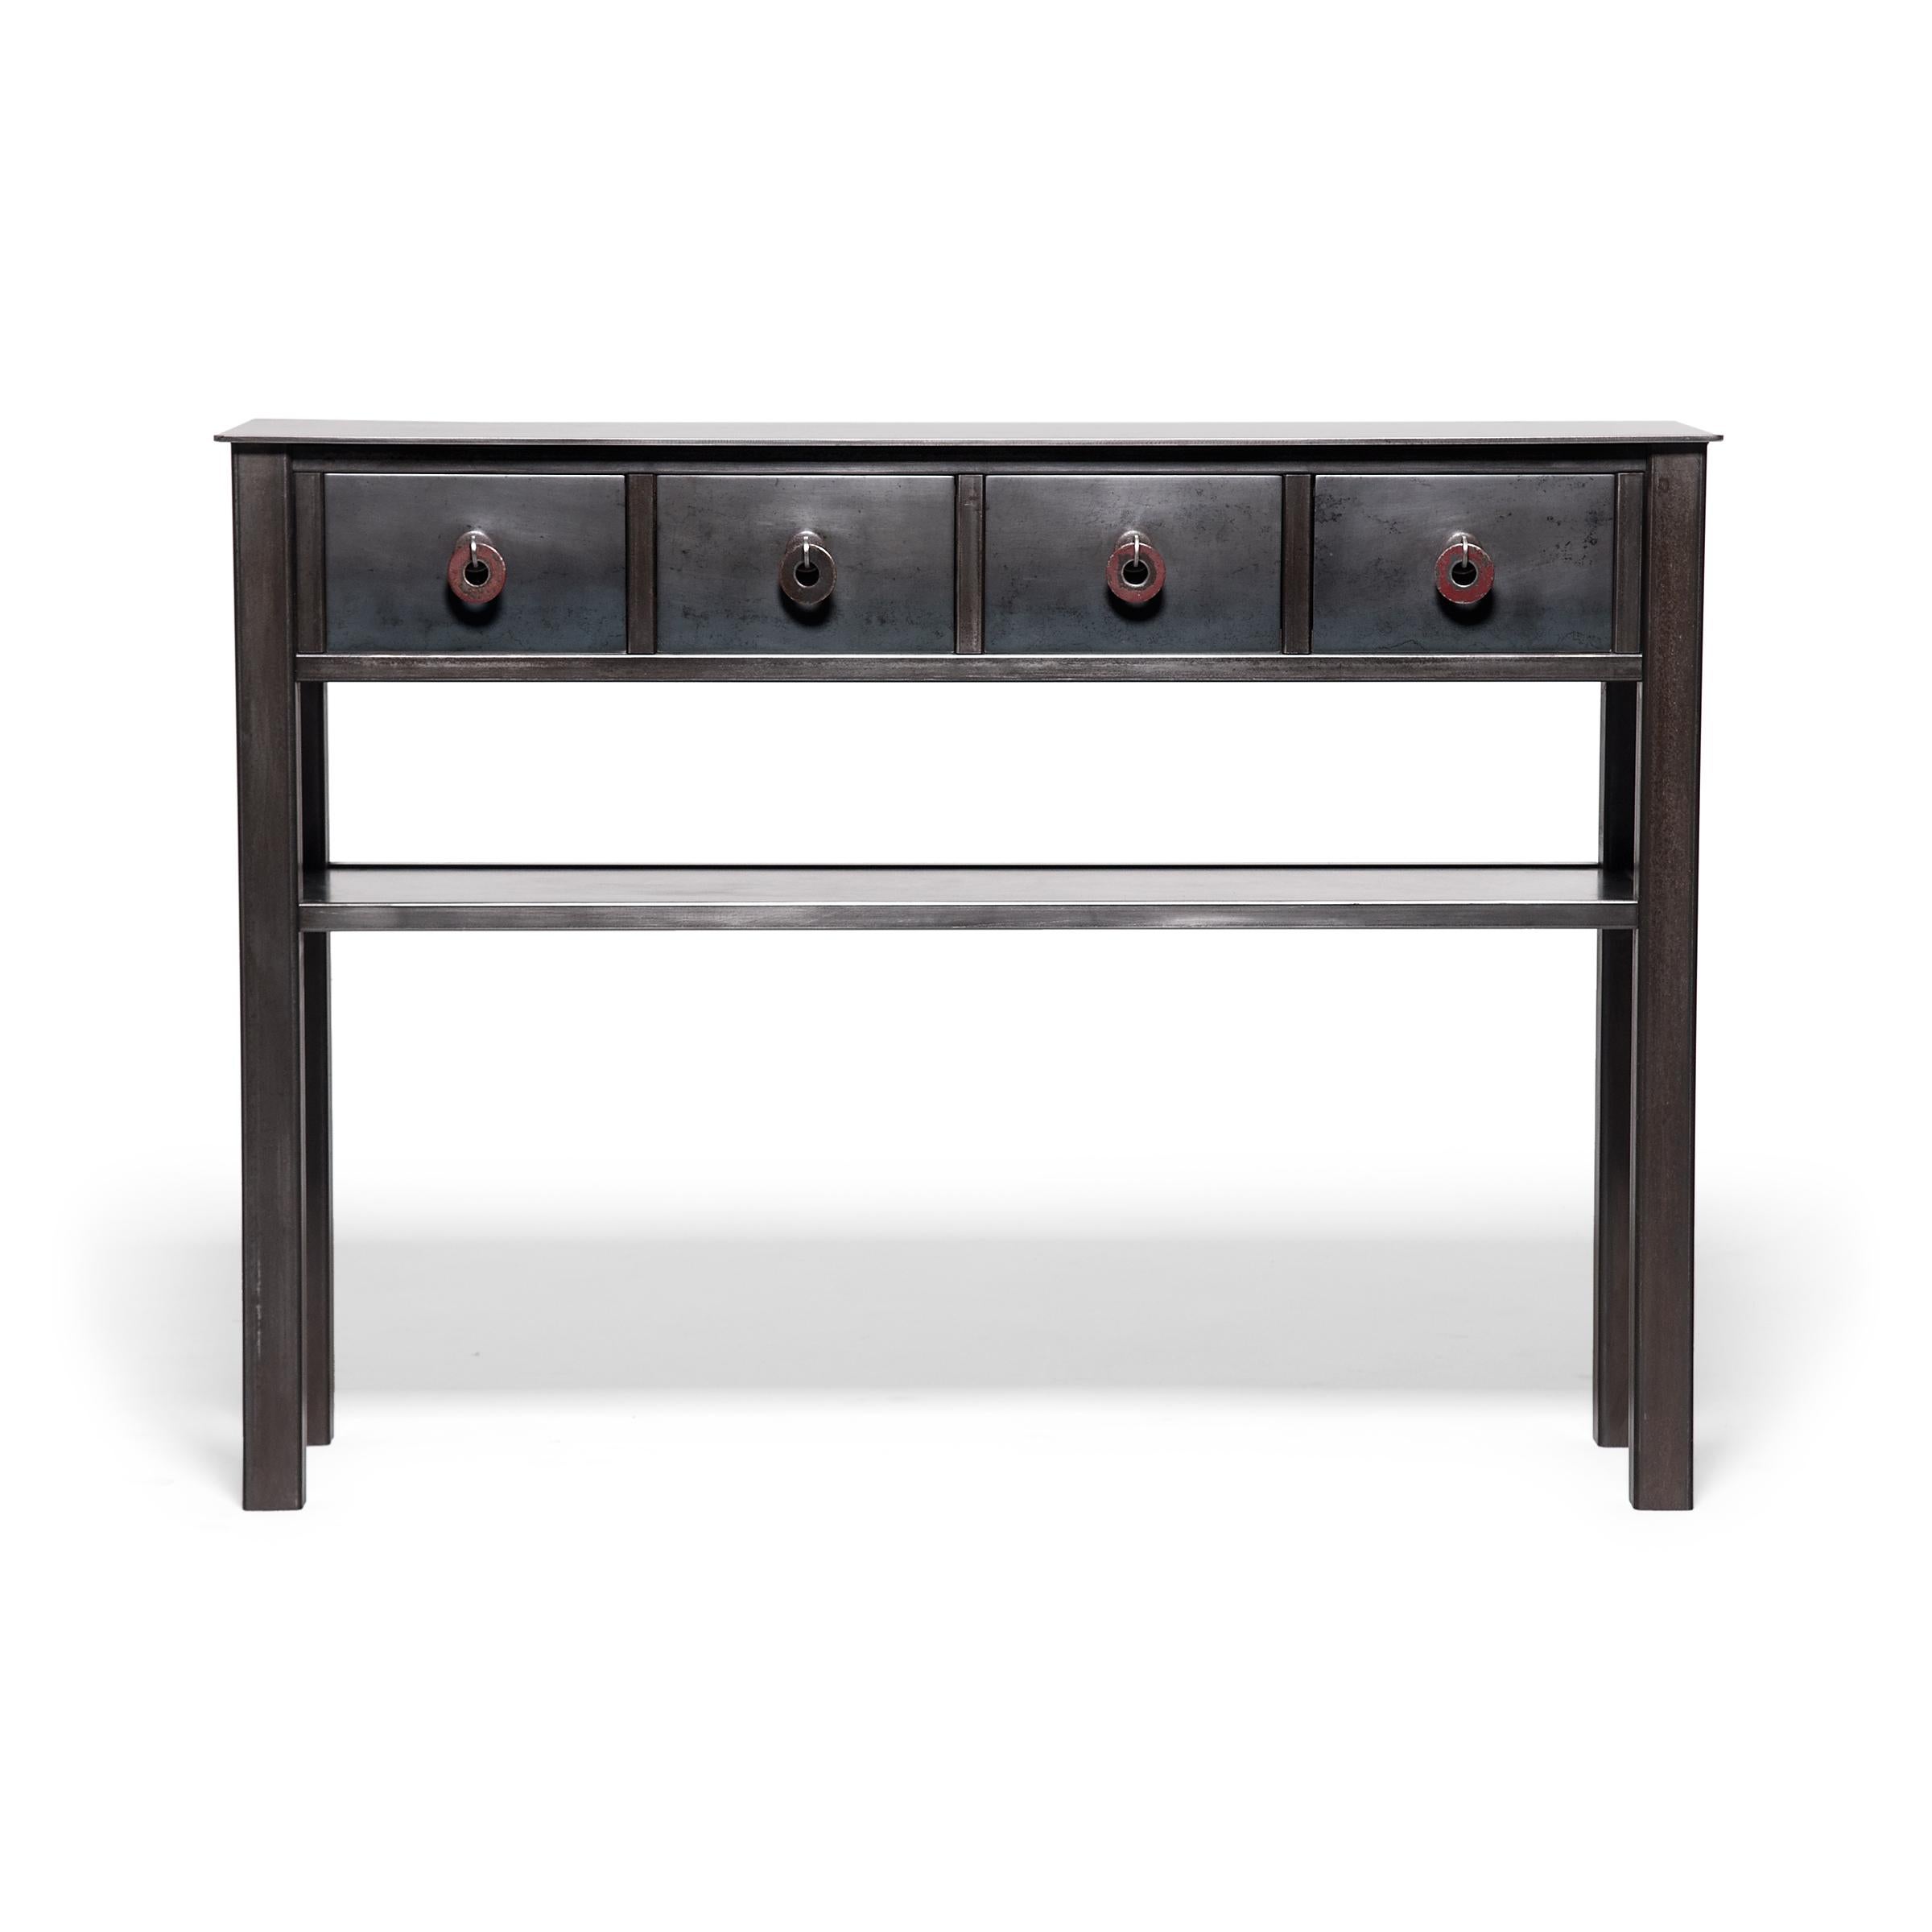 This steel console table by artist Jim Rose forges a connection between Shaker minimalism and the simplified lines and austere aesthetic of Ming-dynasty furniture. The culmination of years of studying the vernacular history of furniture design, this